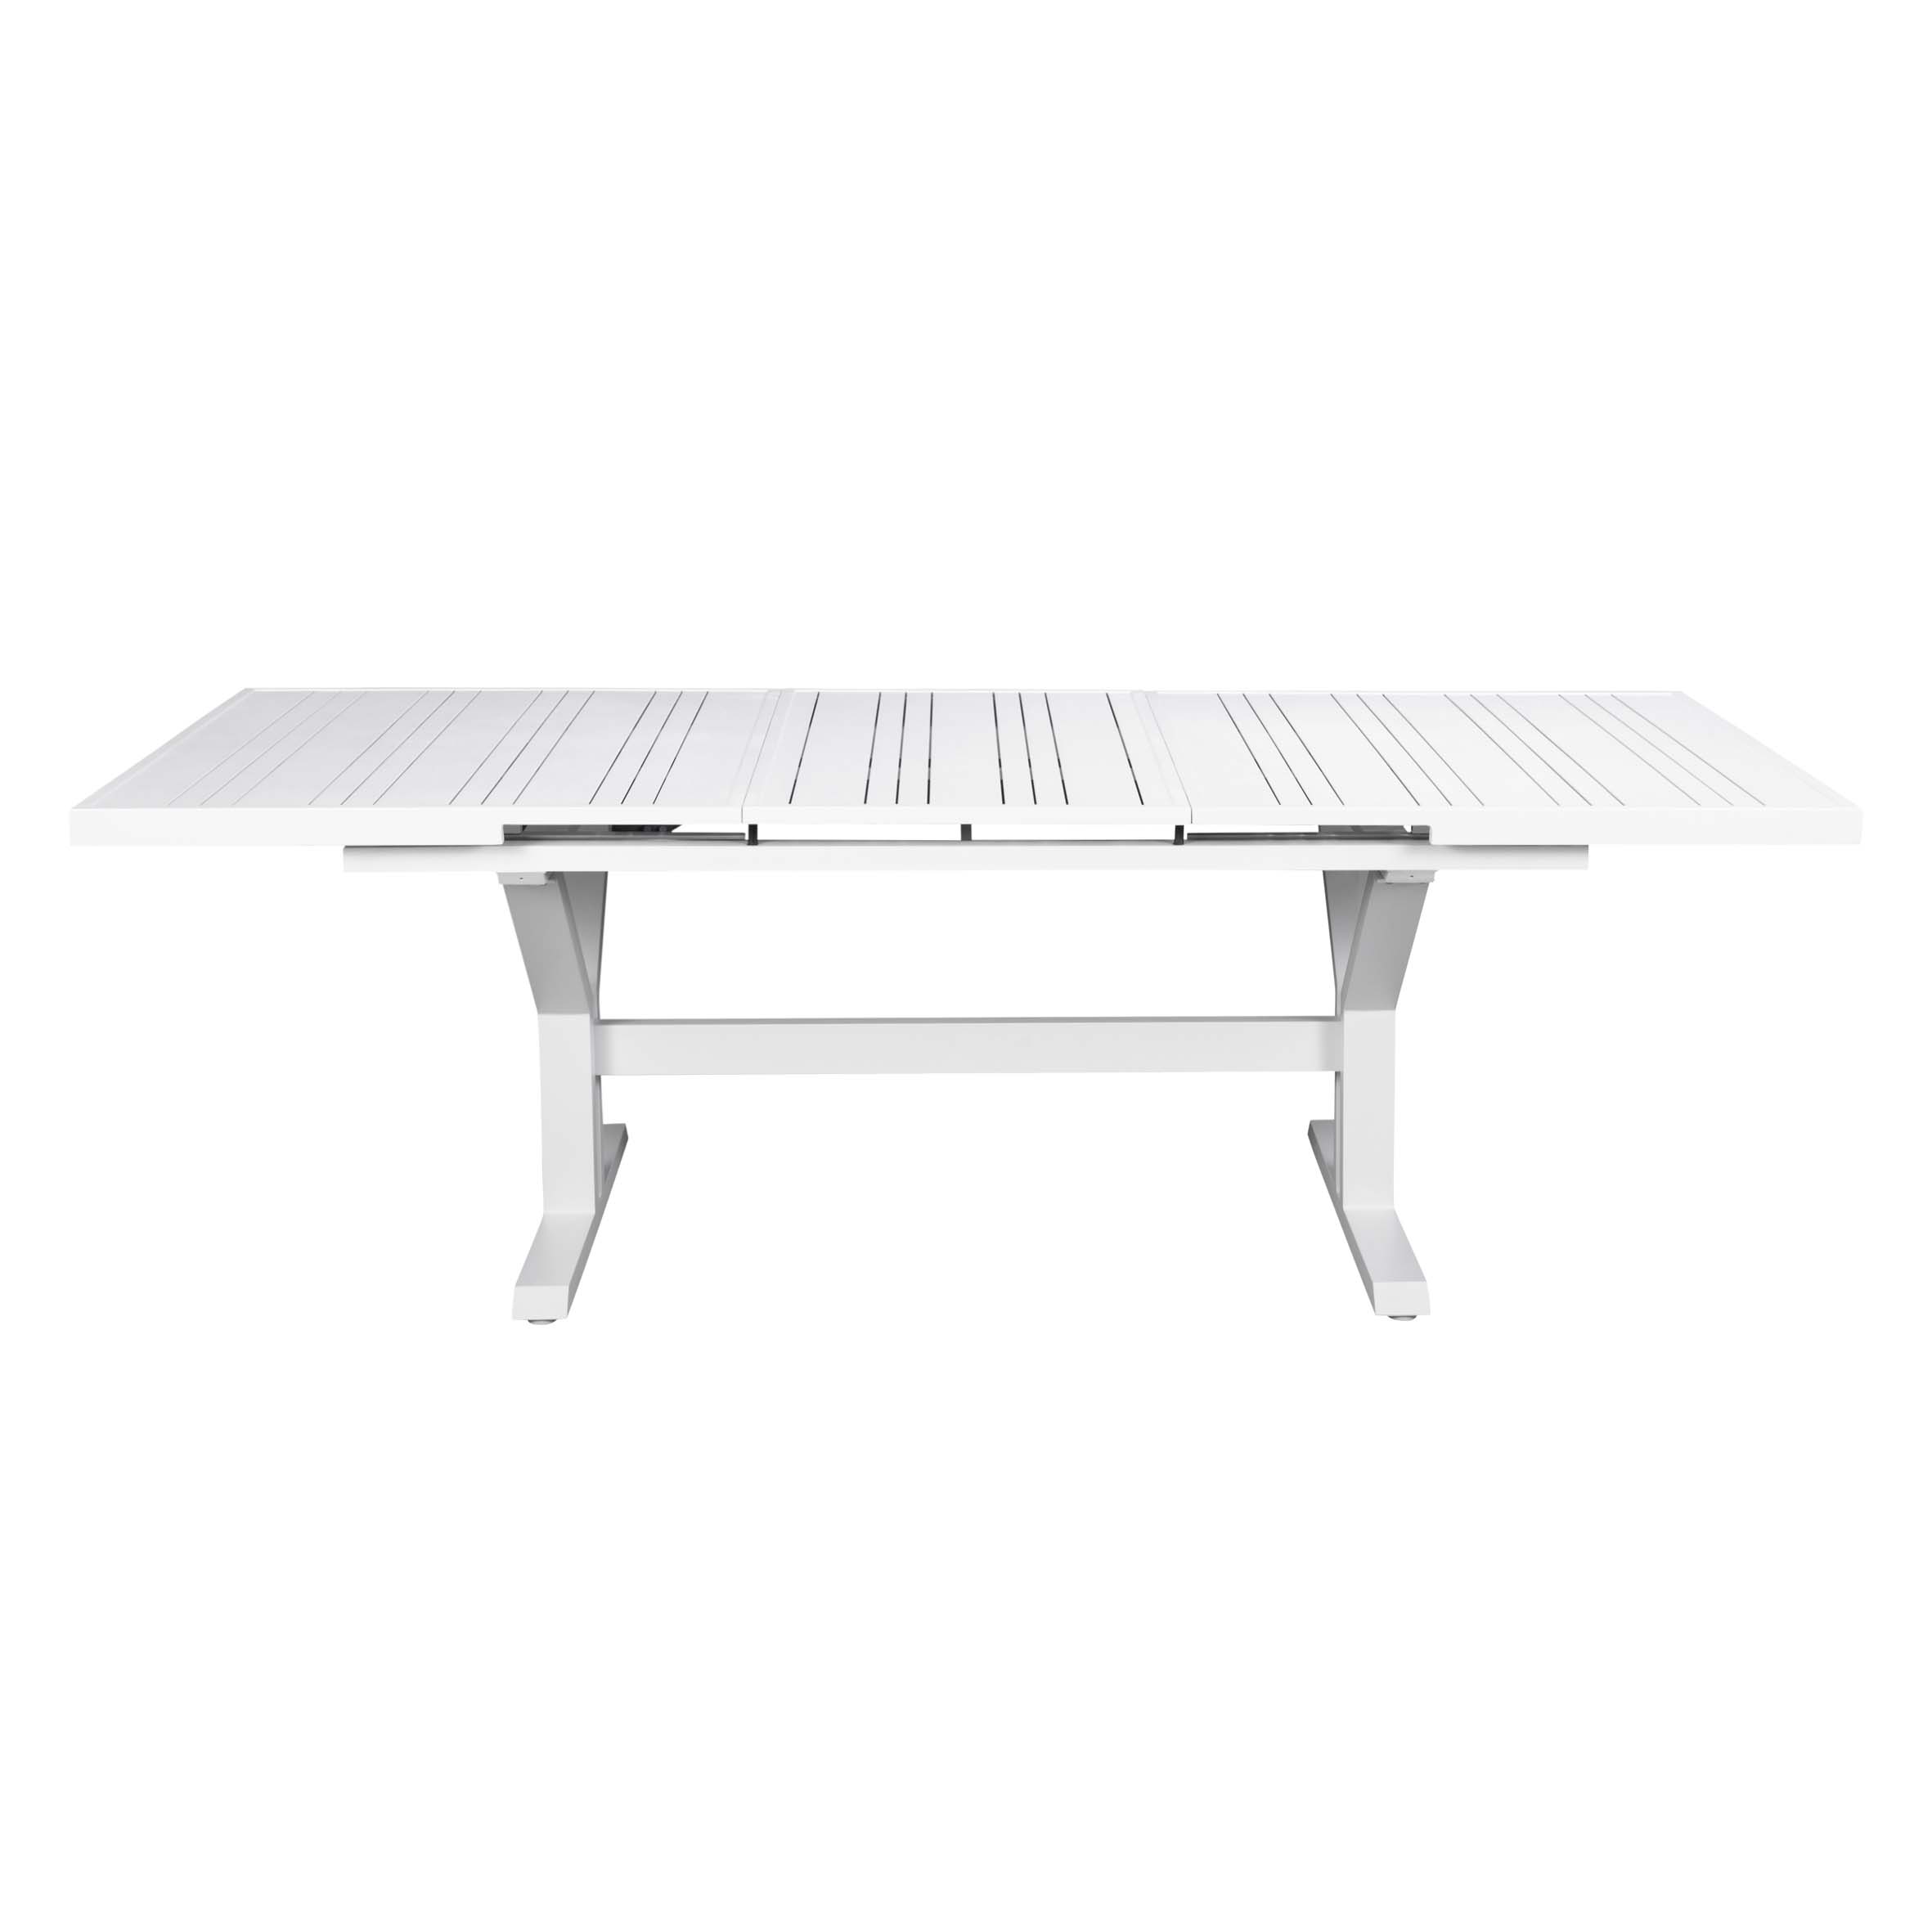 Tiffany auto extension table S4